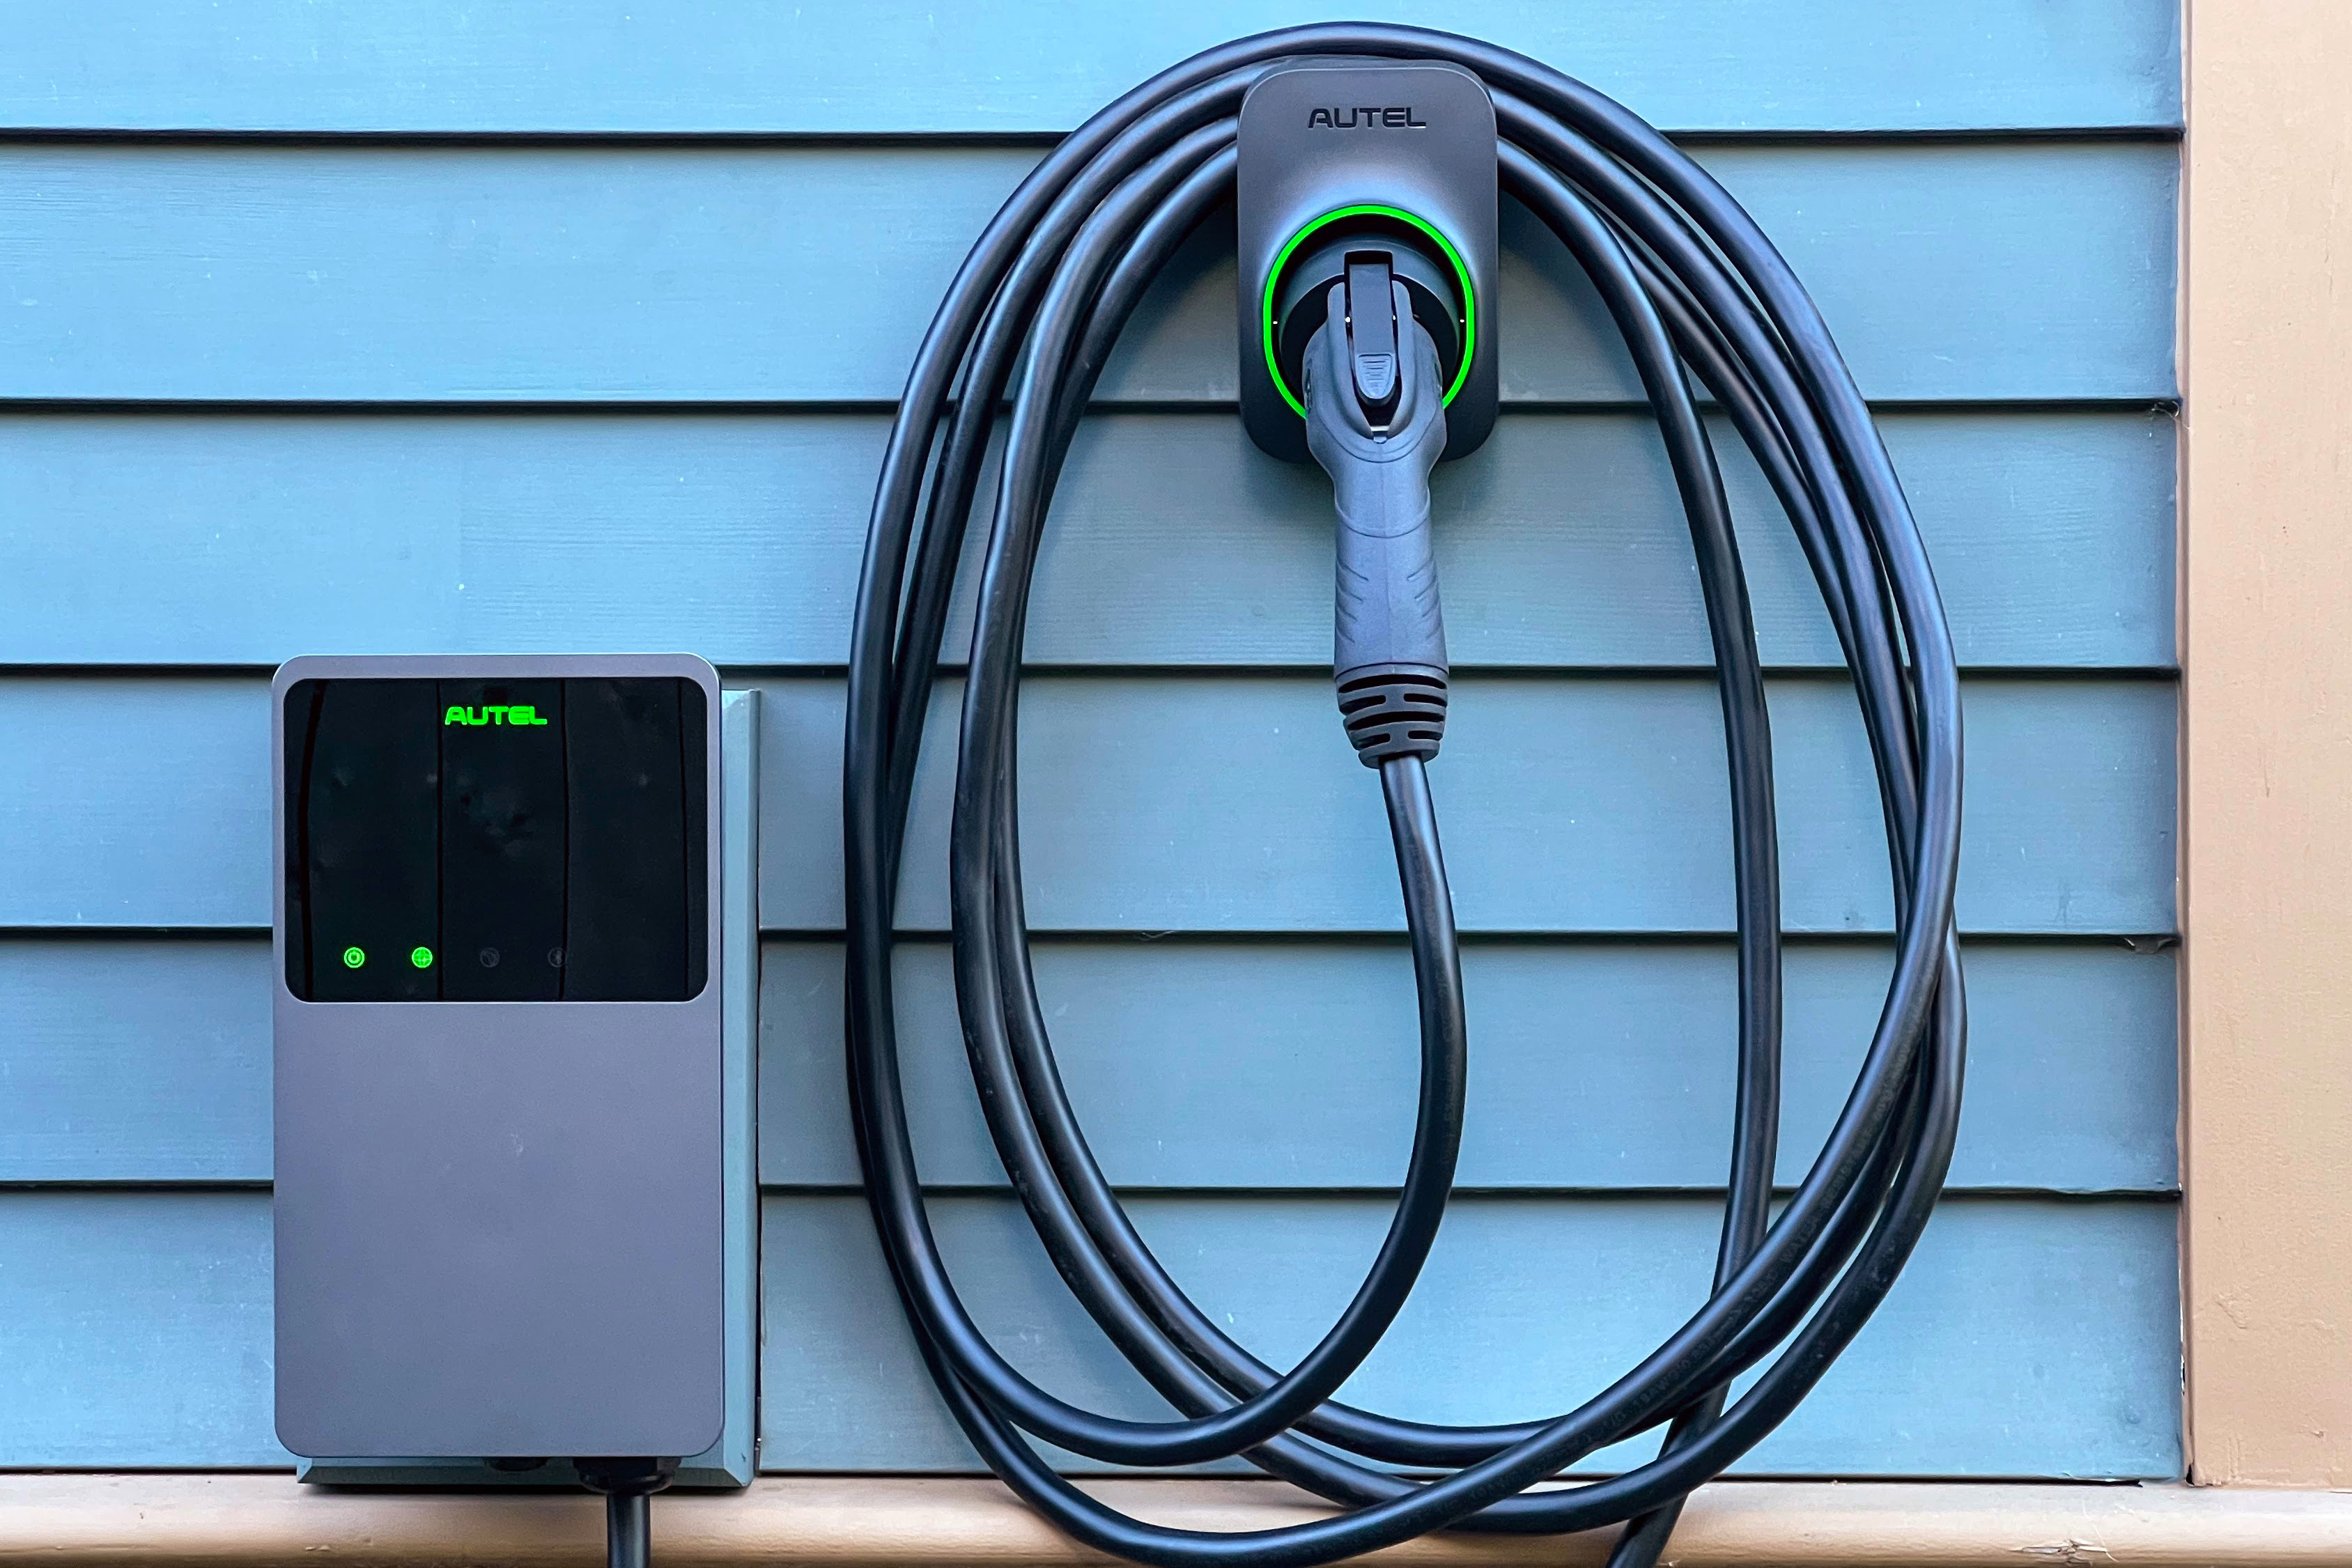 Best EV Home Charger for Kia EV6 